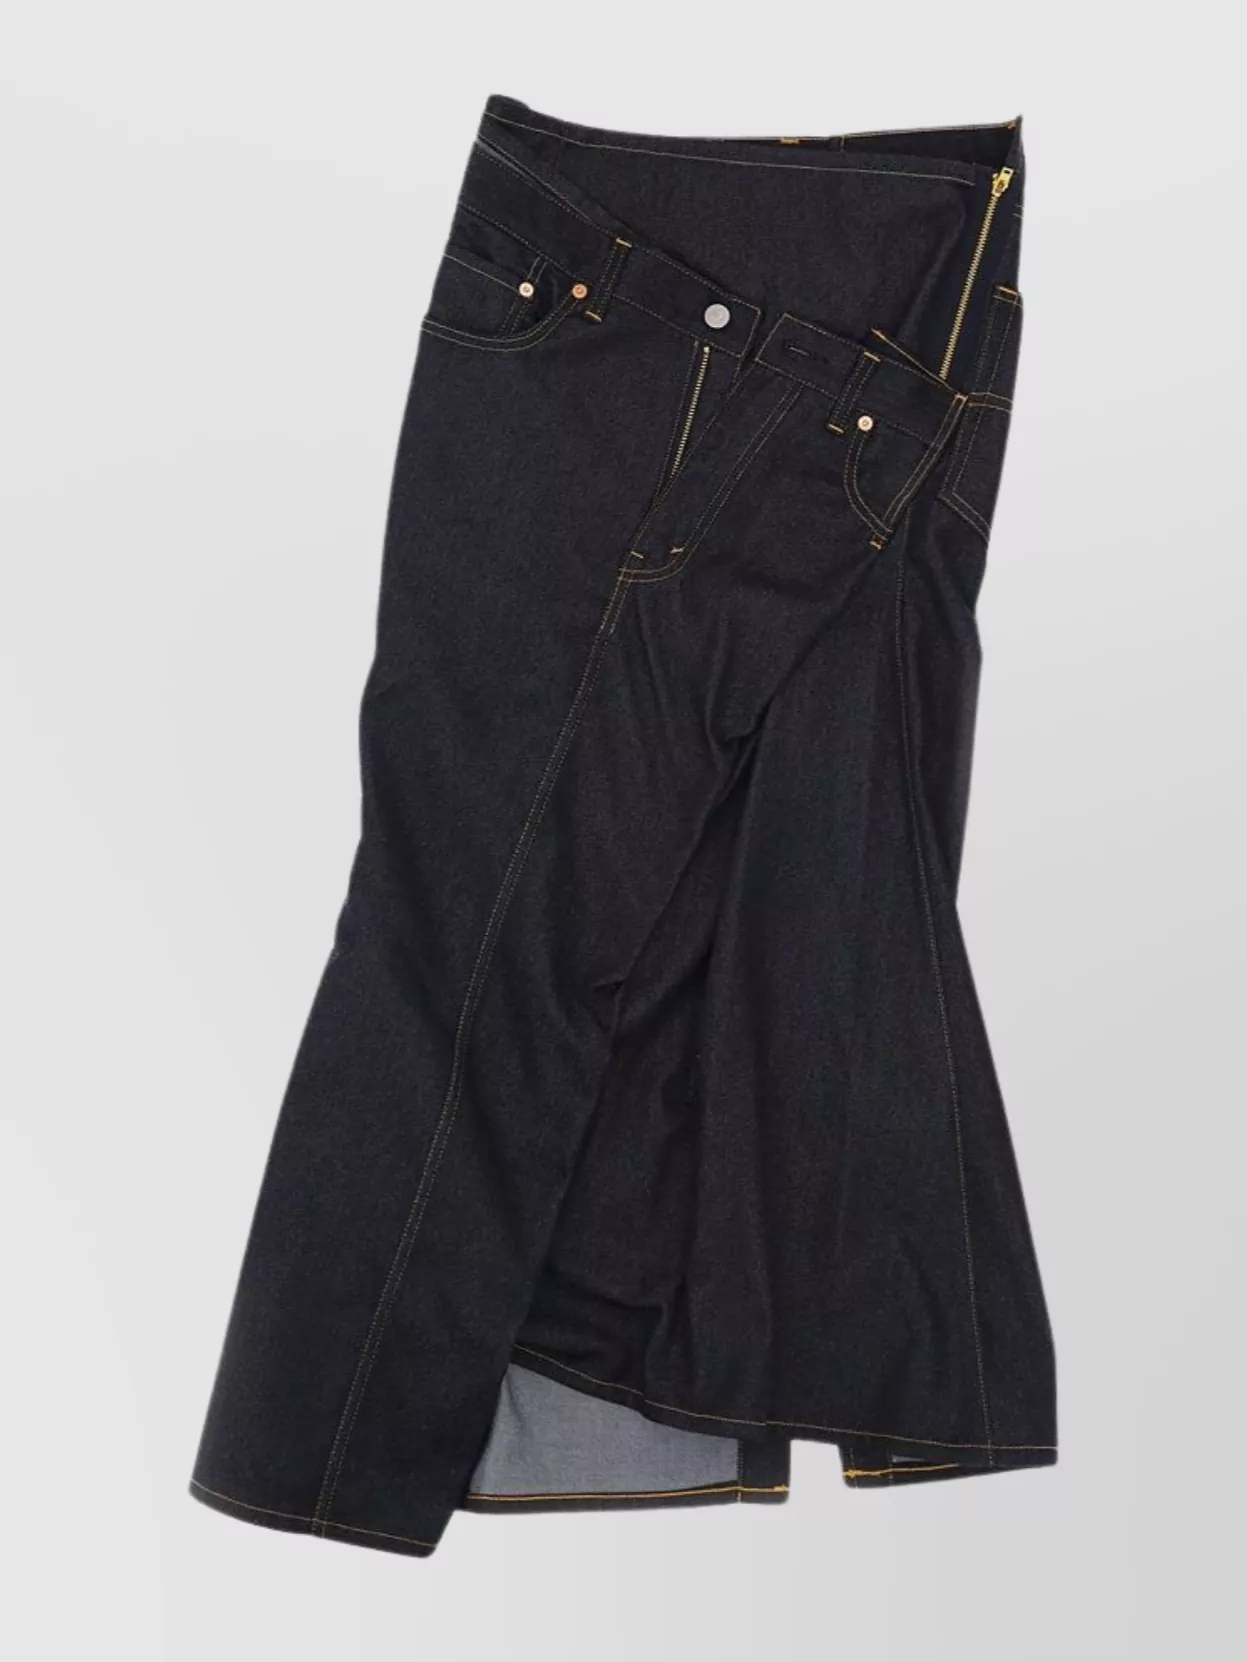 Shop Junya Watanabe Levi's Skirt With Back Slit And Belt Loops